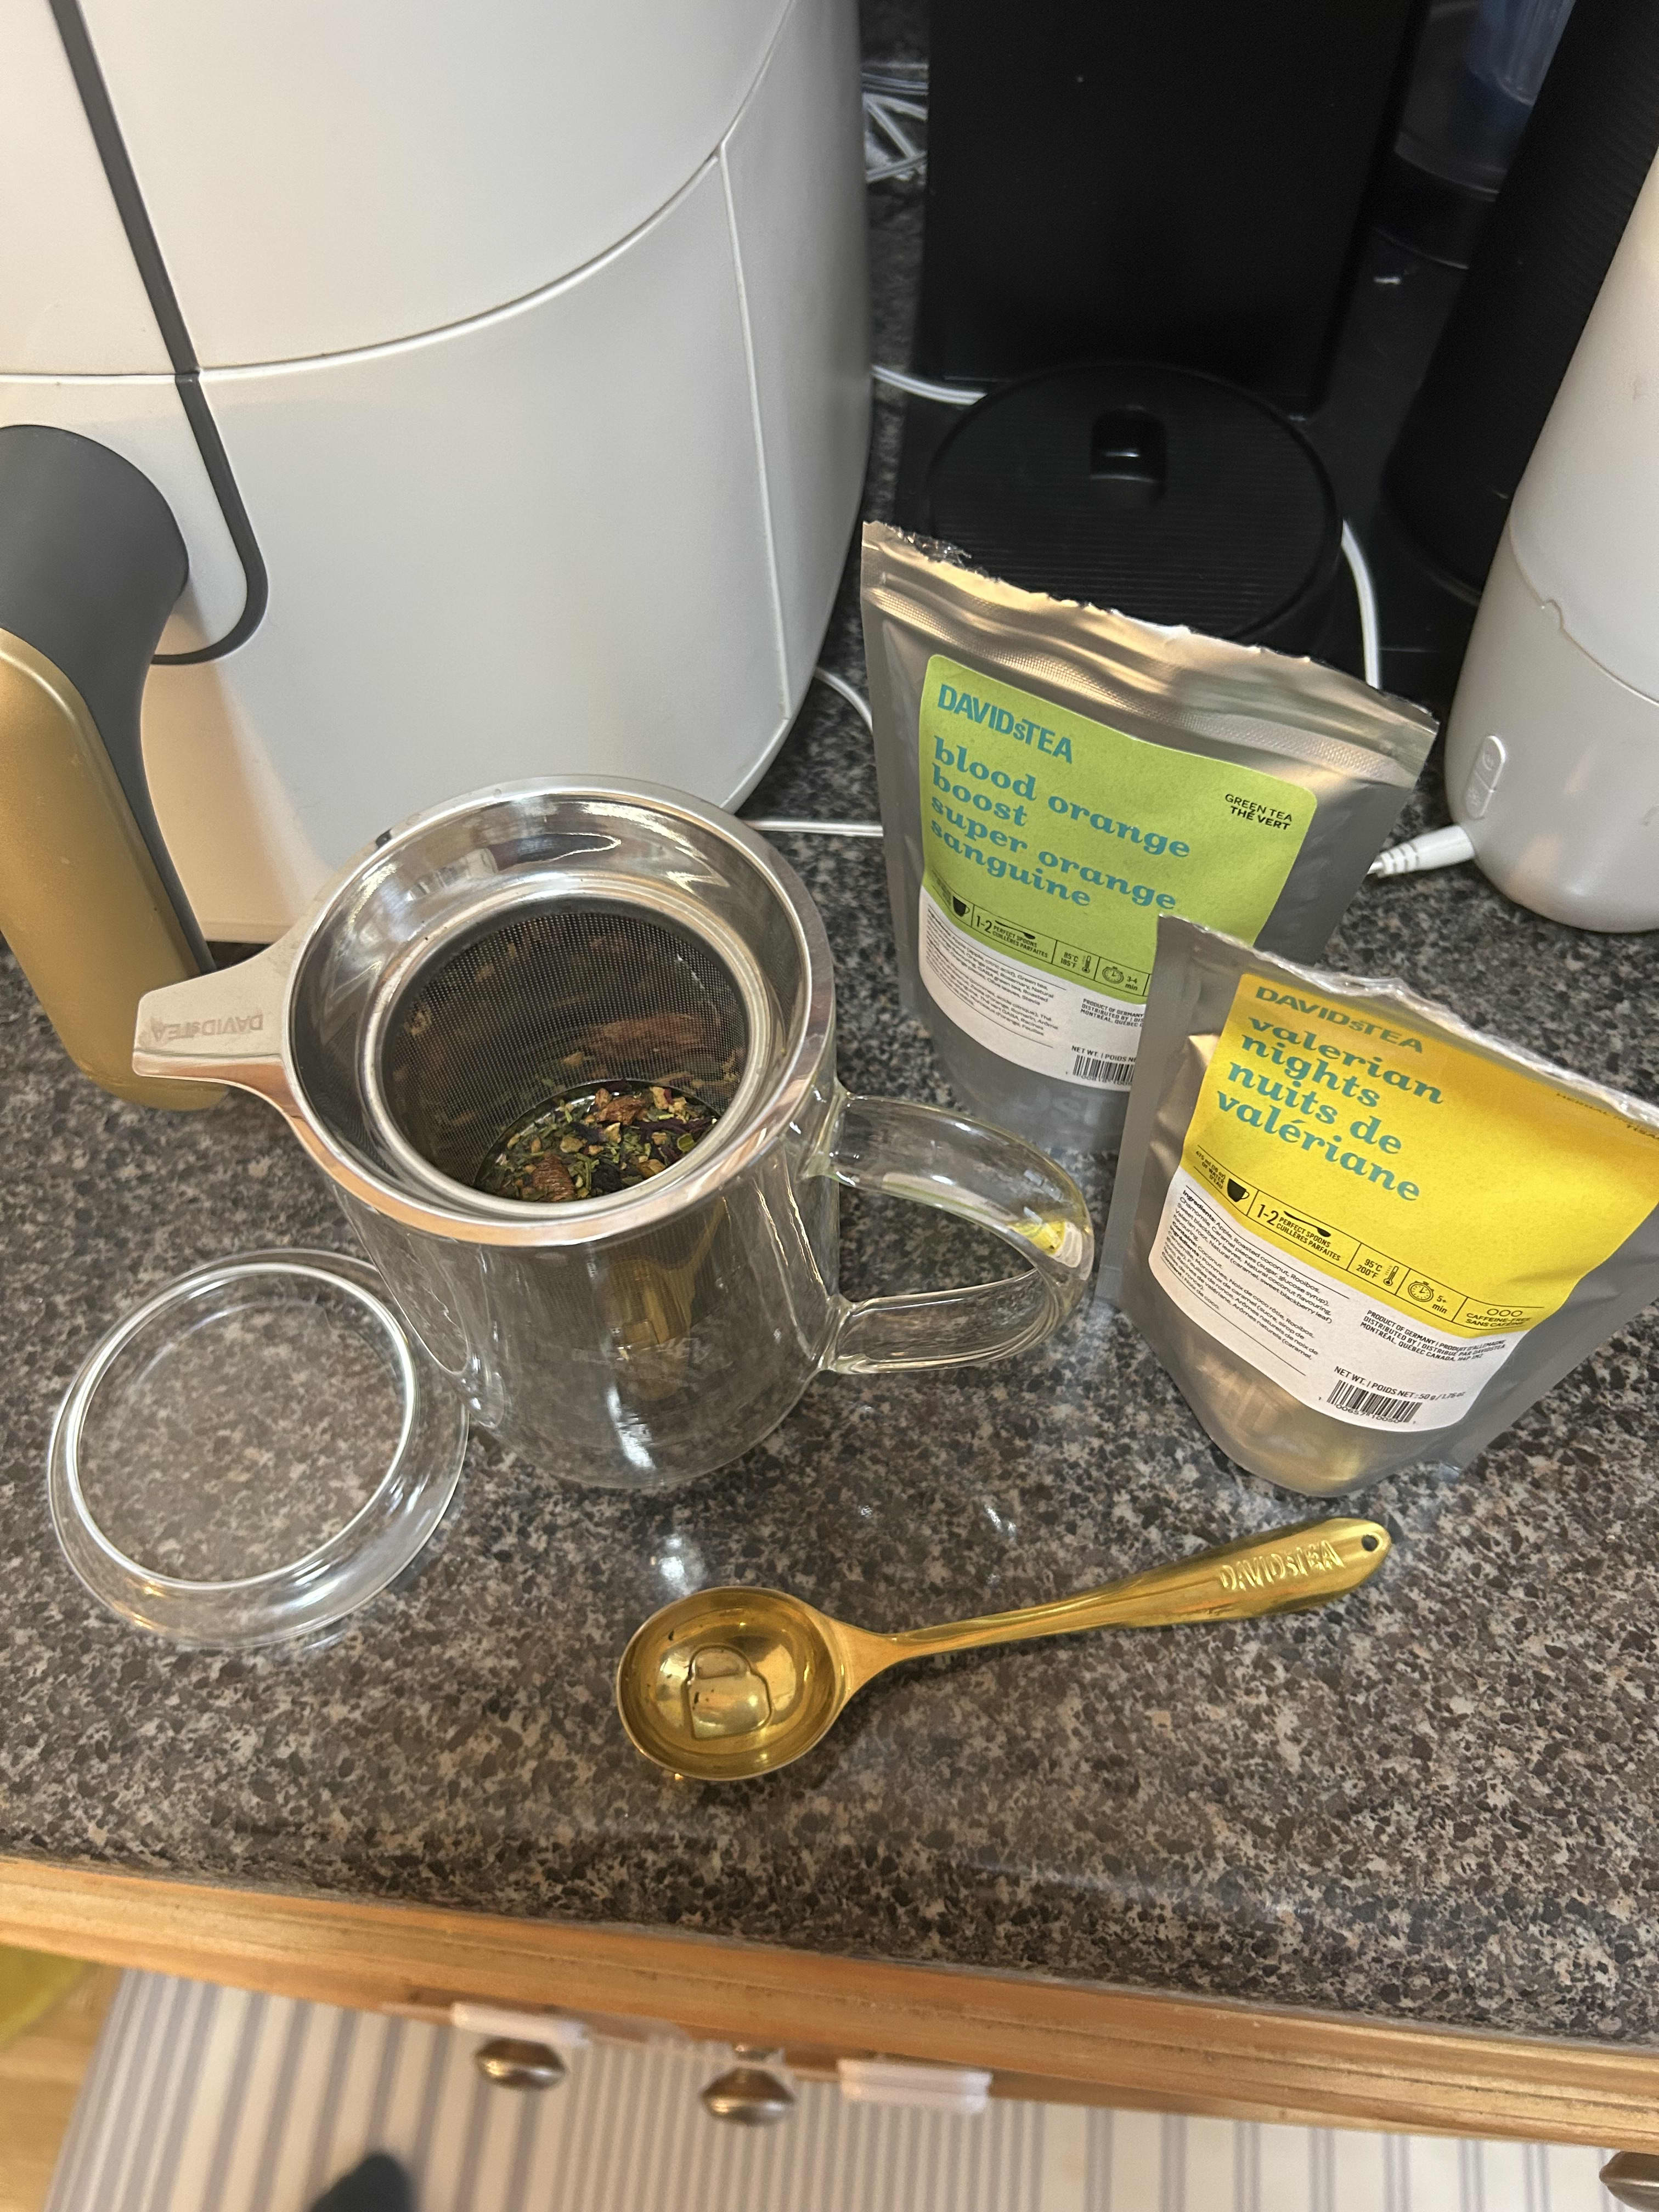 Carry Travel Mug by DAVIDsTEA Review - World of Tea Infusers